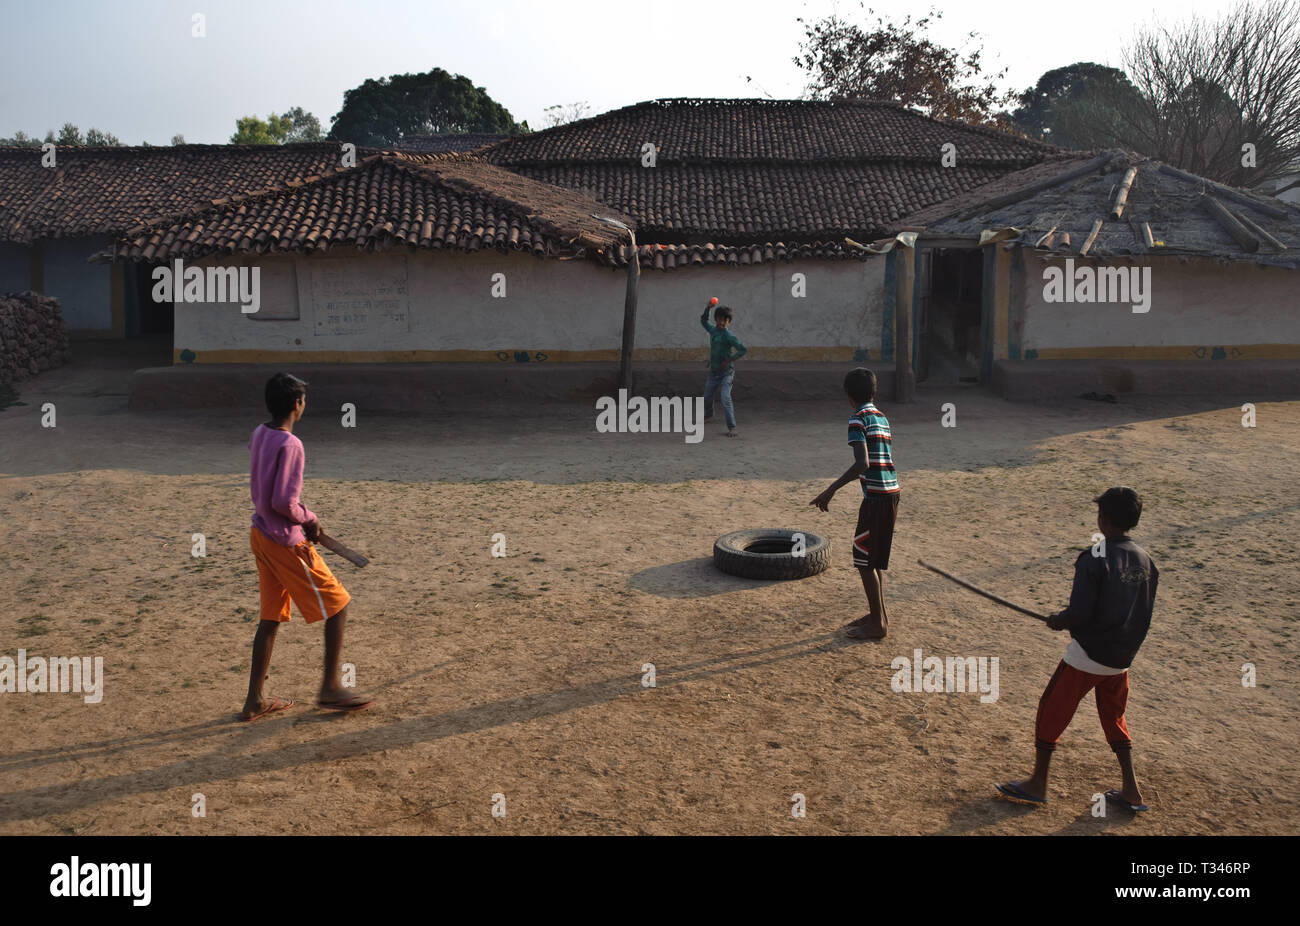 Boys are playing cricket in rural India Stock Photo